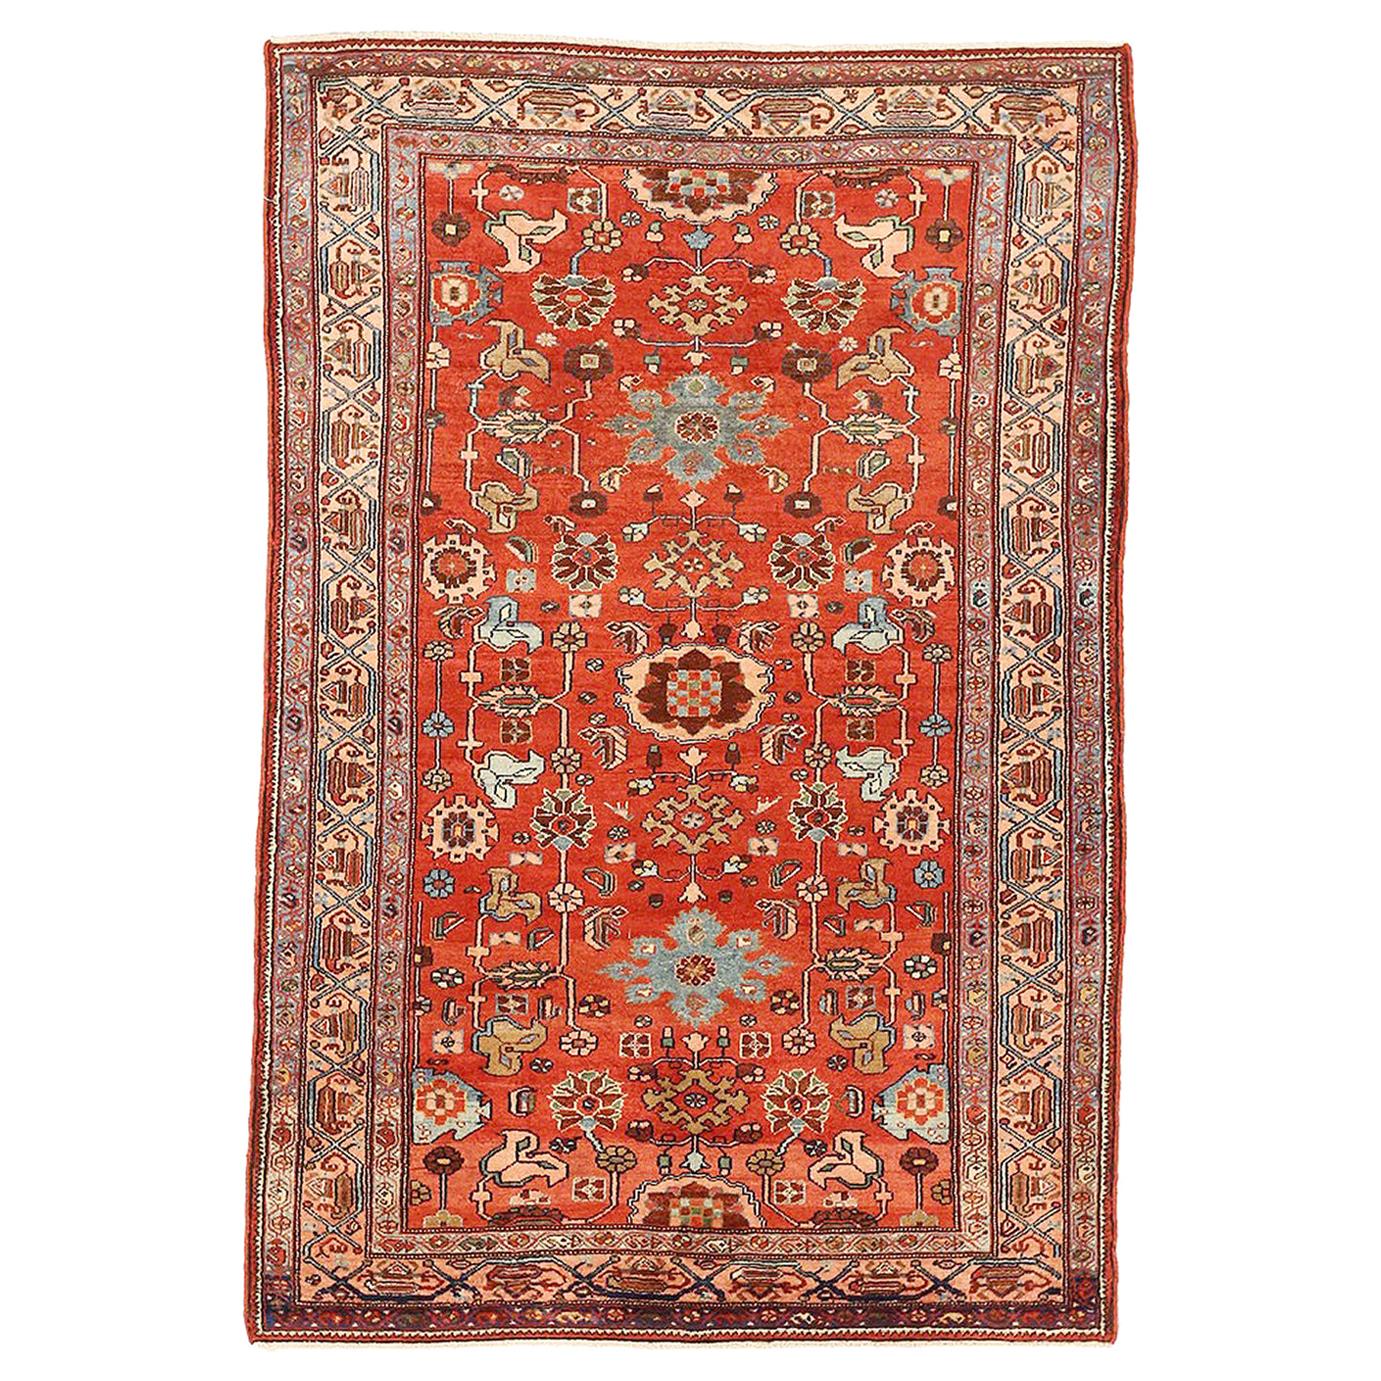 Antique Persian Hamadan Rug with Blue and Red Floral Details